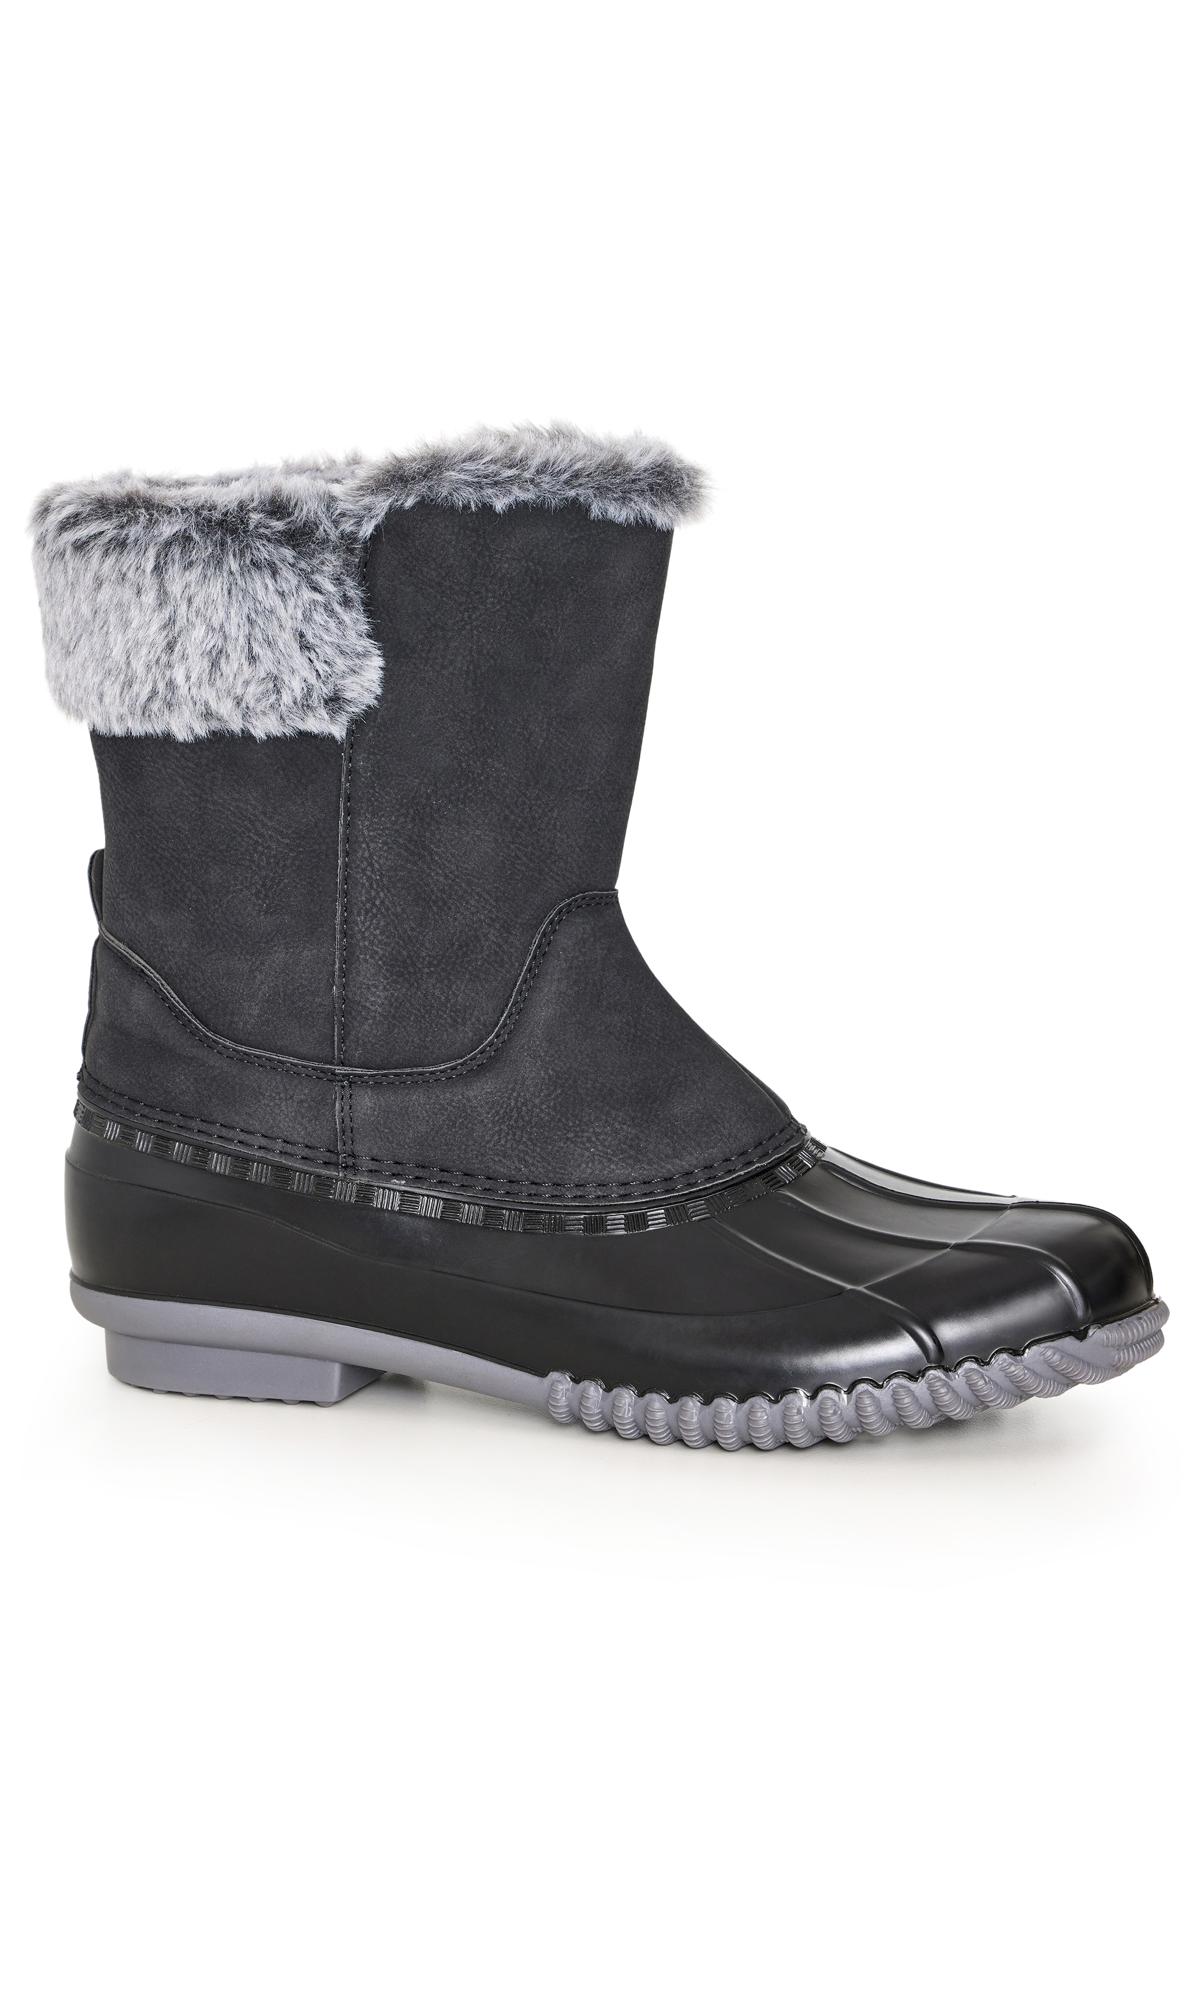 Evans WIDE FIT Black Faux Fur Lined Embroided Snow Boots 1